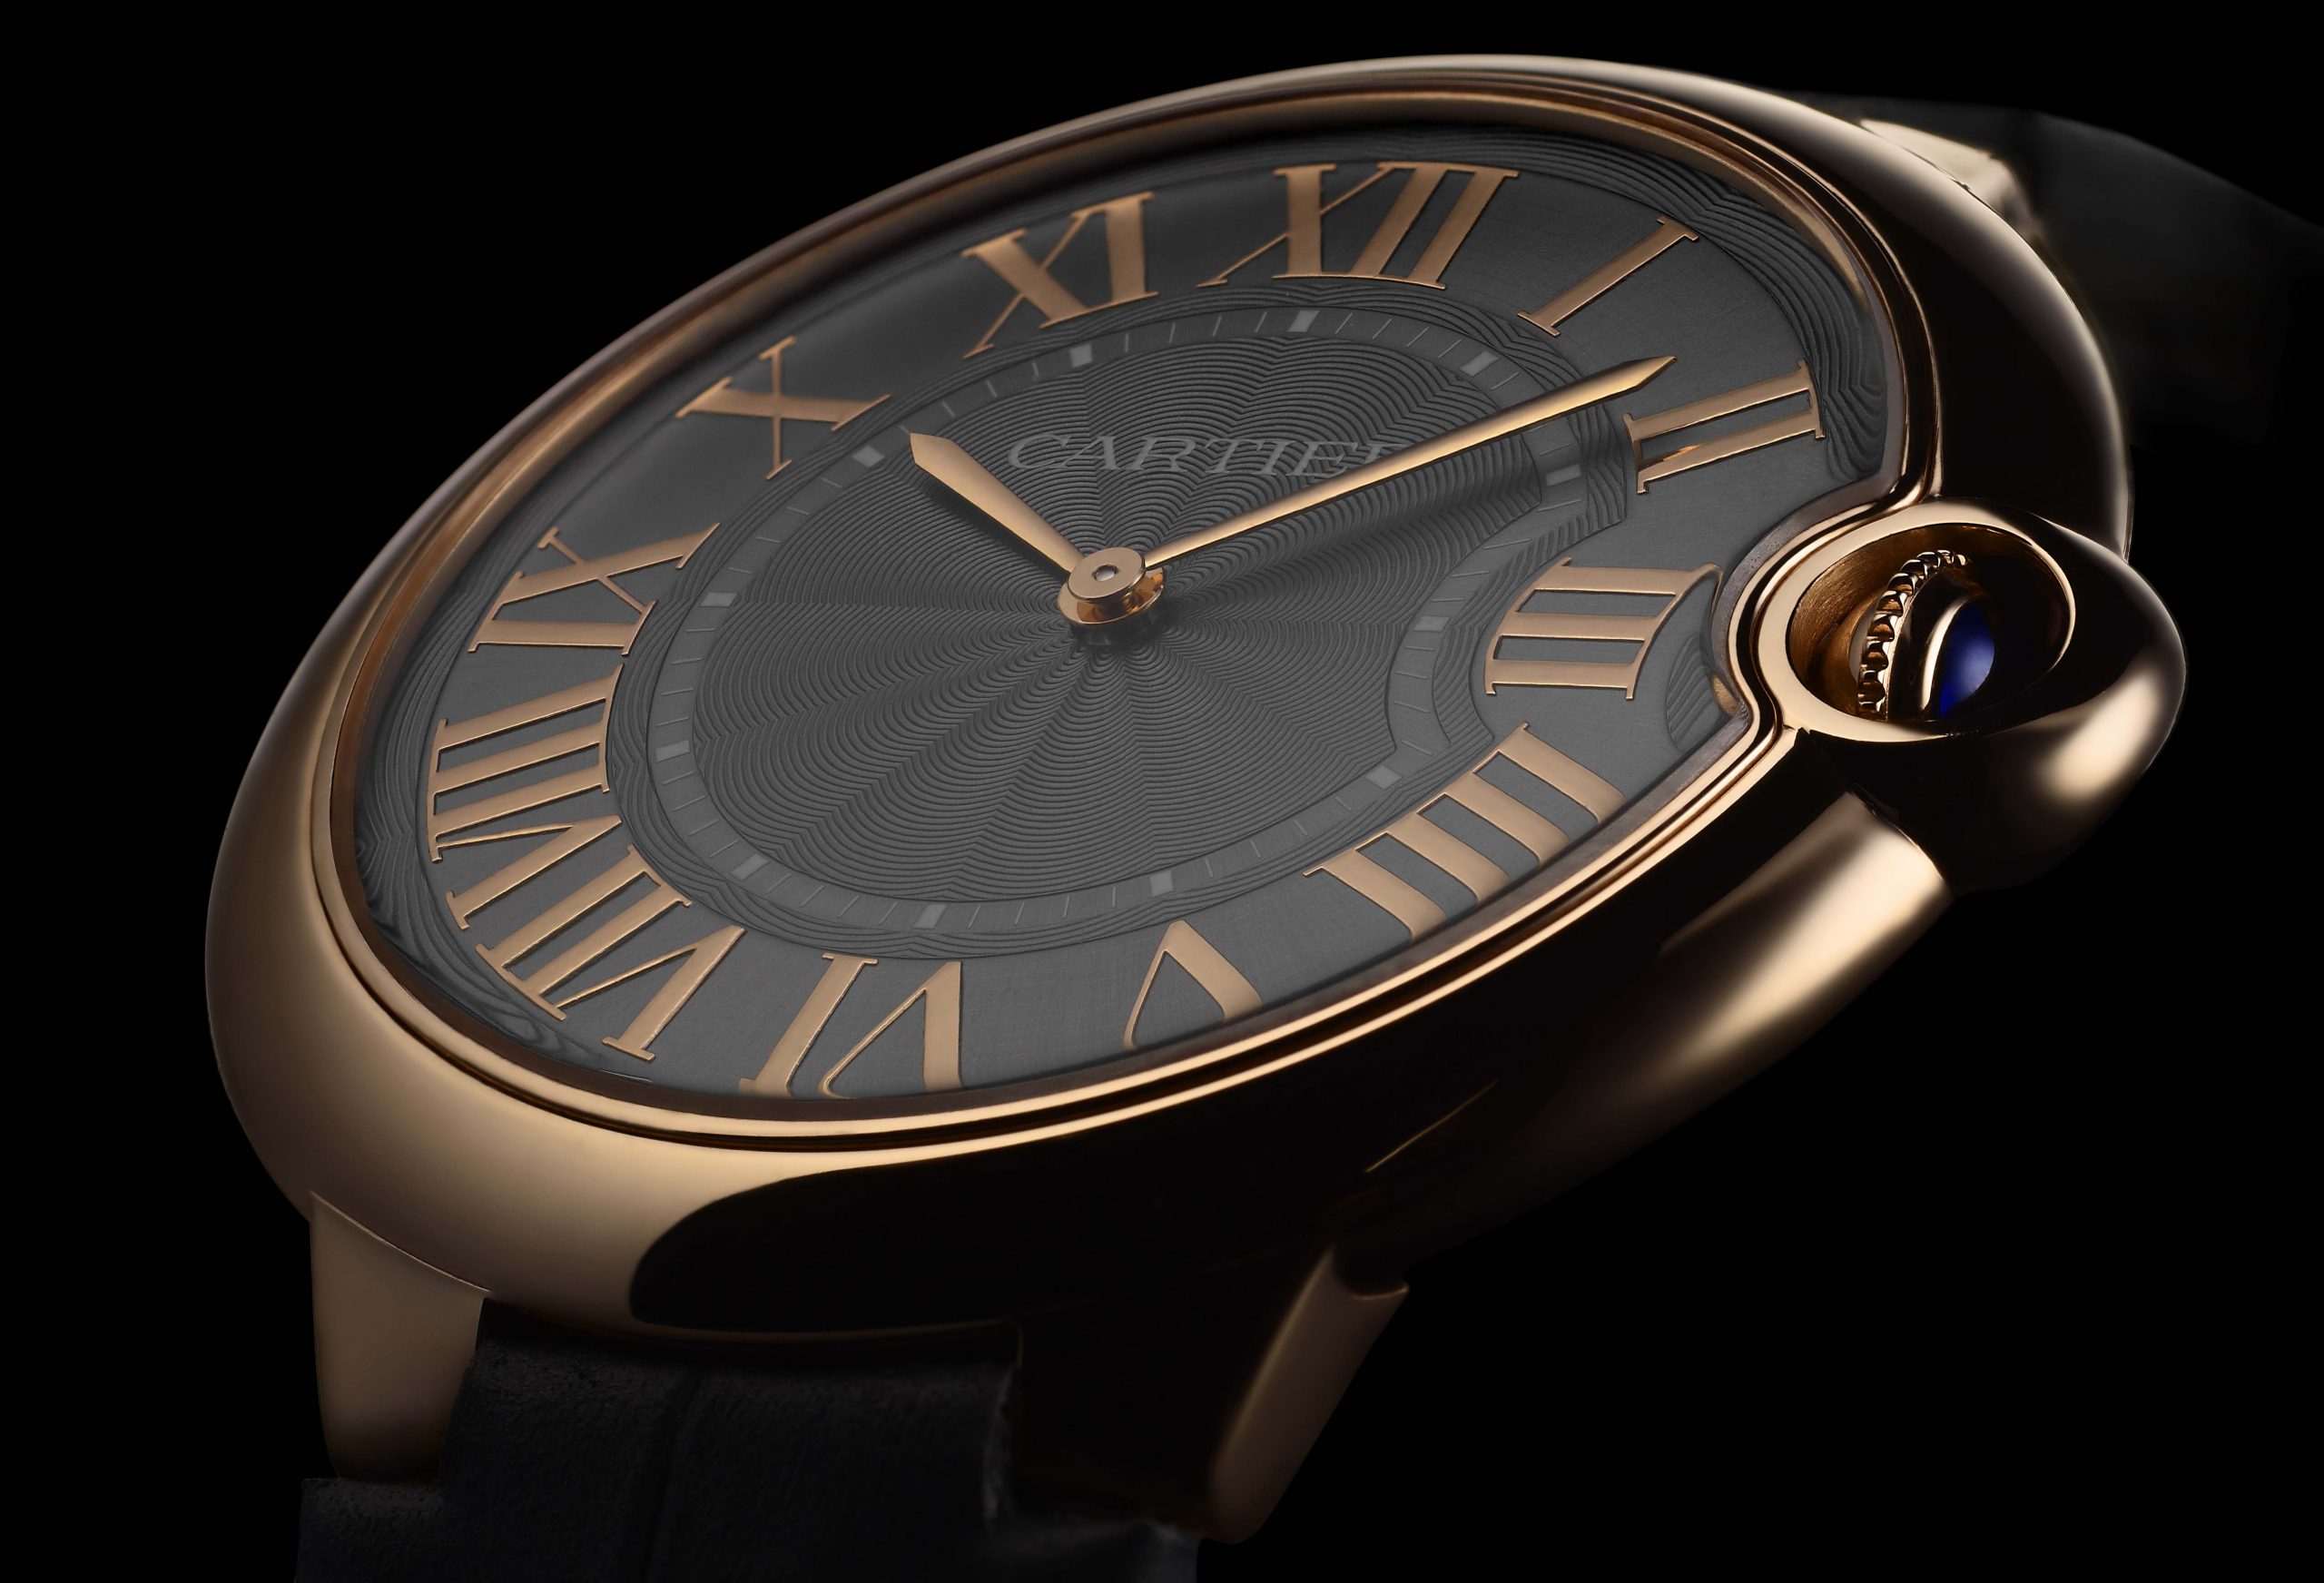 Cartier Ballon Bleu Extra Flat: A Carmelo Anthony’s Haute Time Watch of the Day